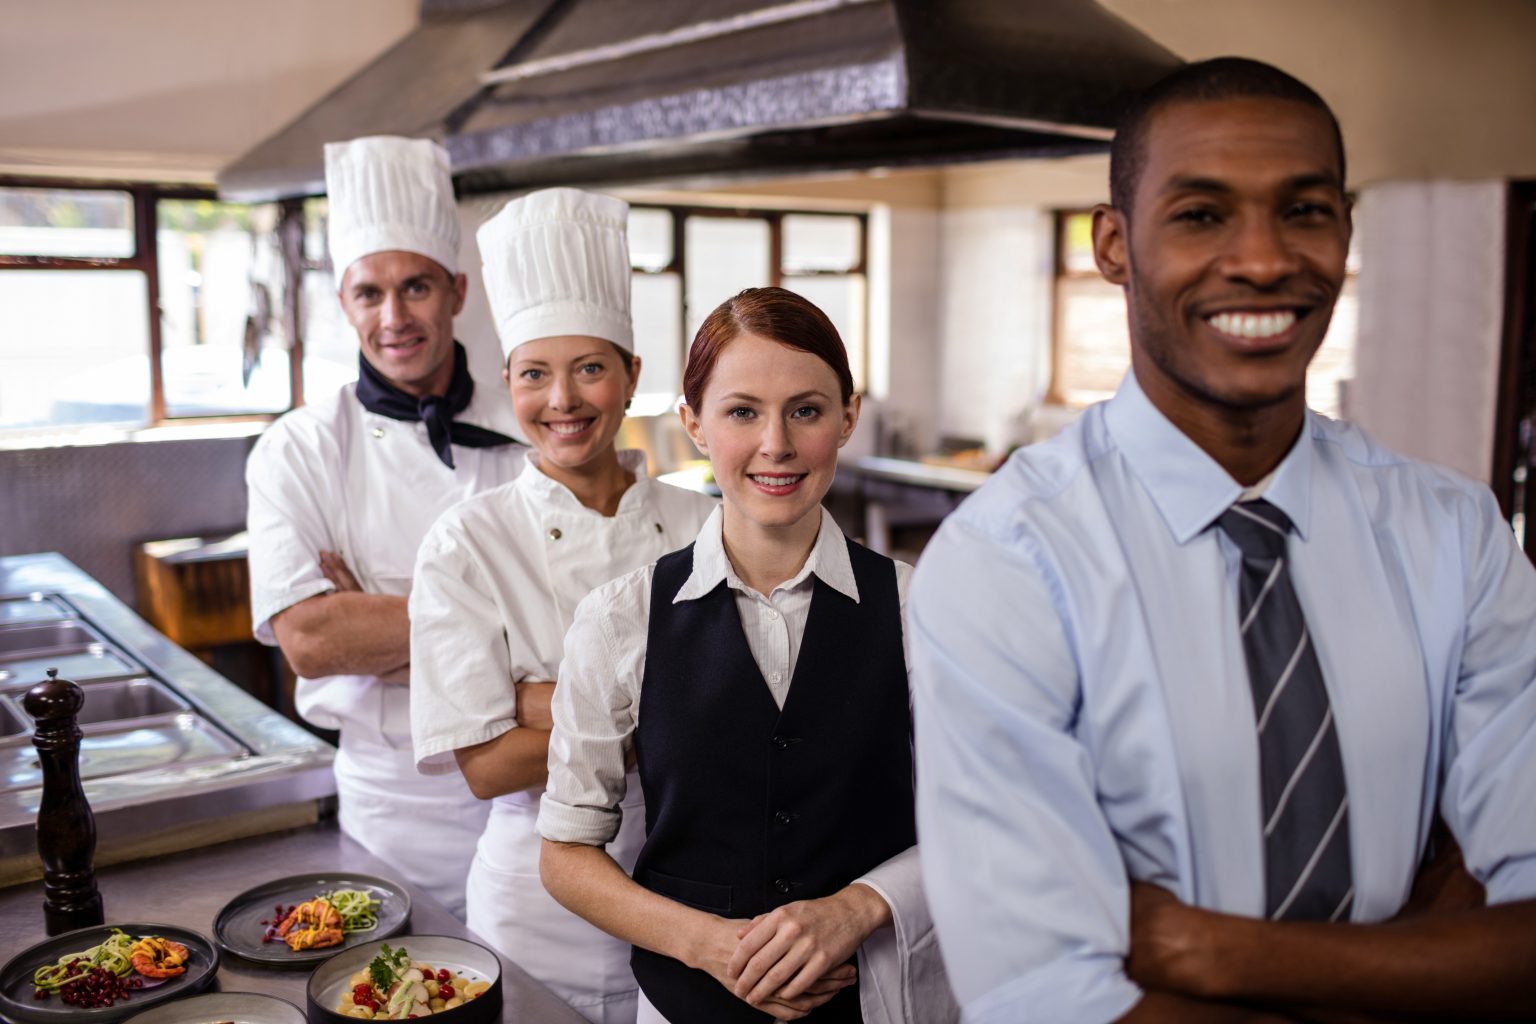 Group of hospitality staff standing with arms crossed in kitchen